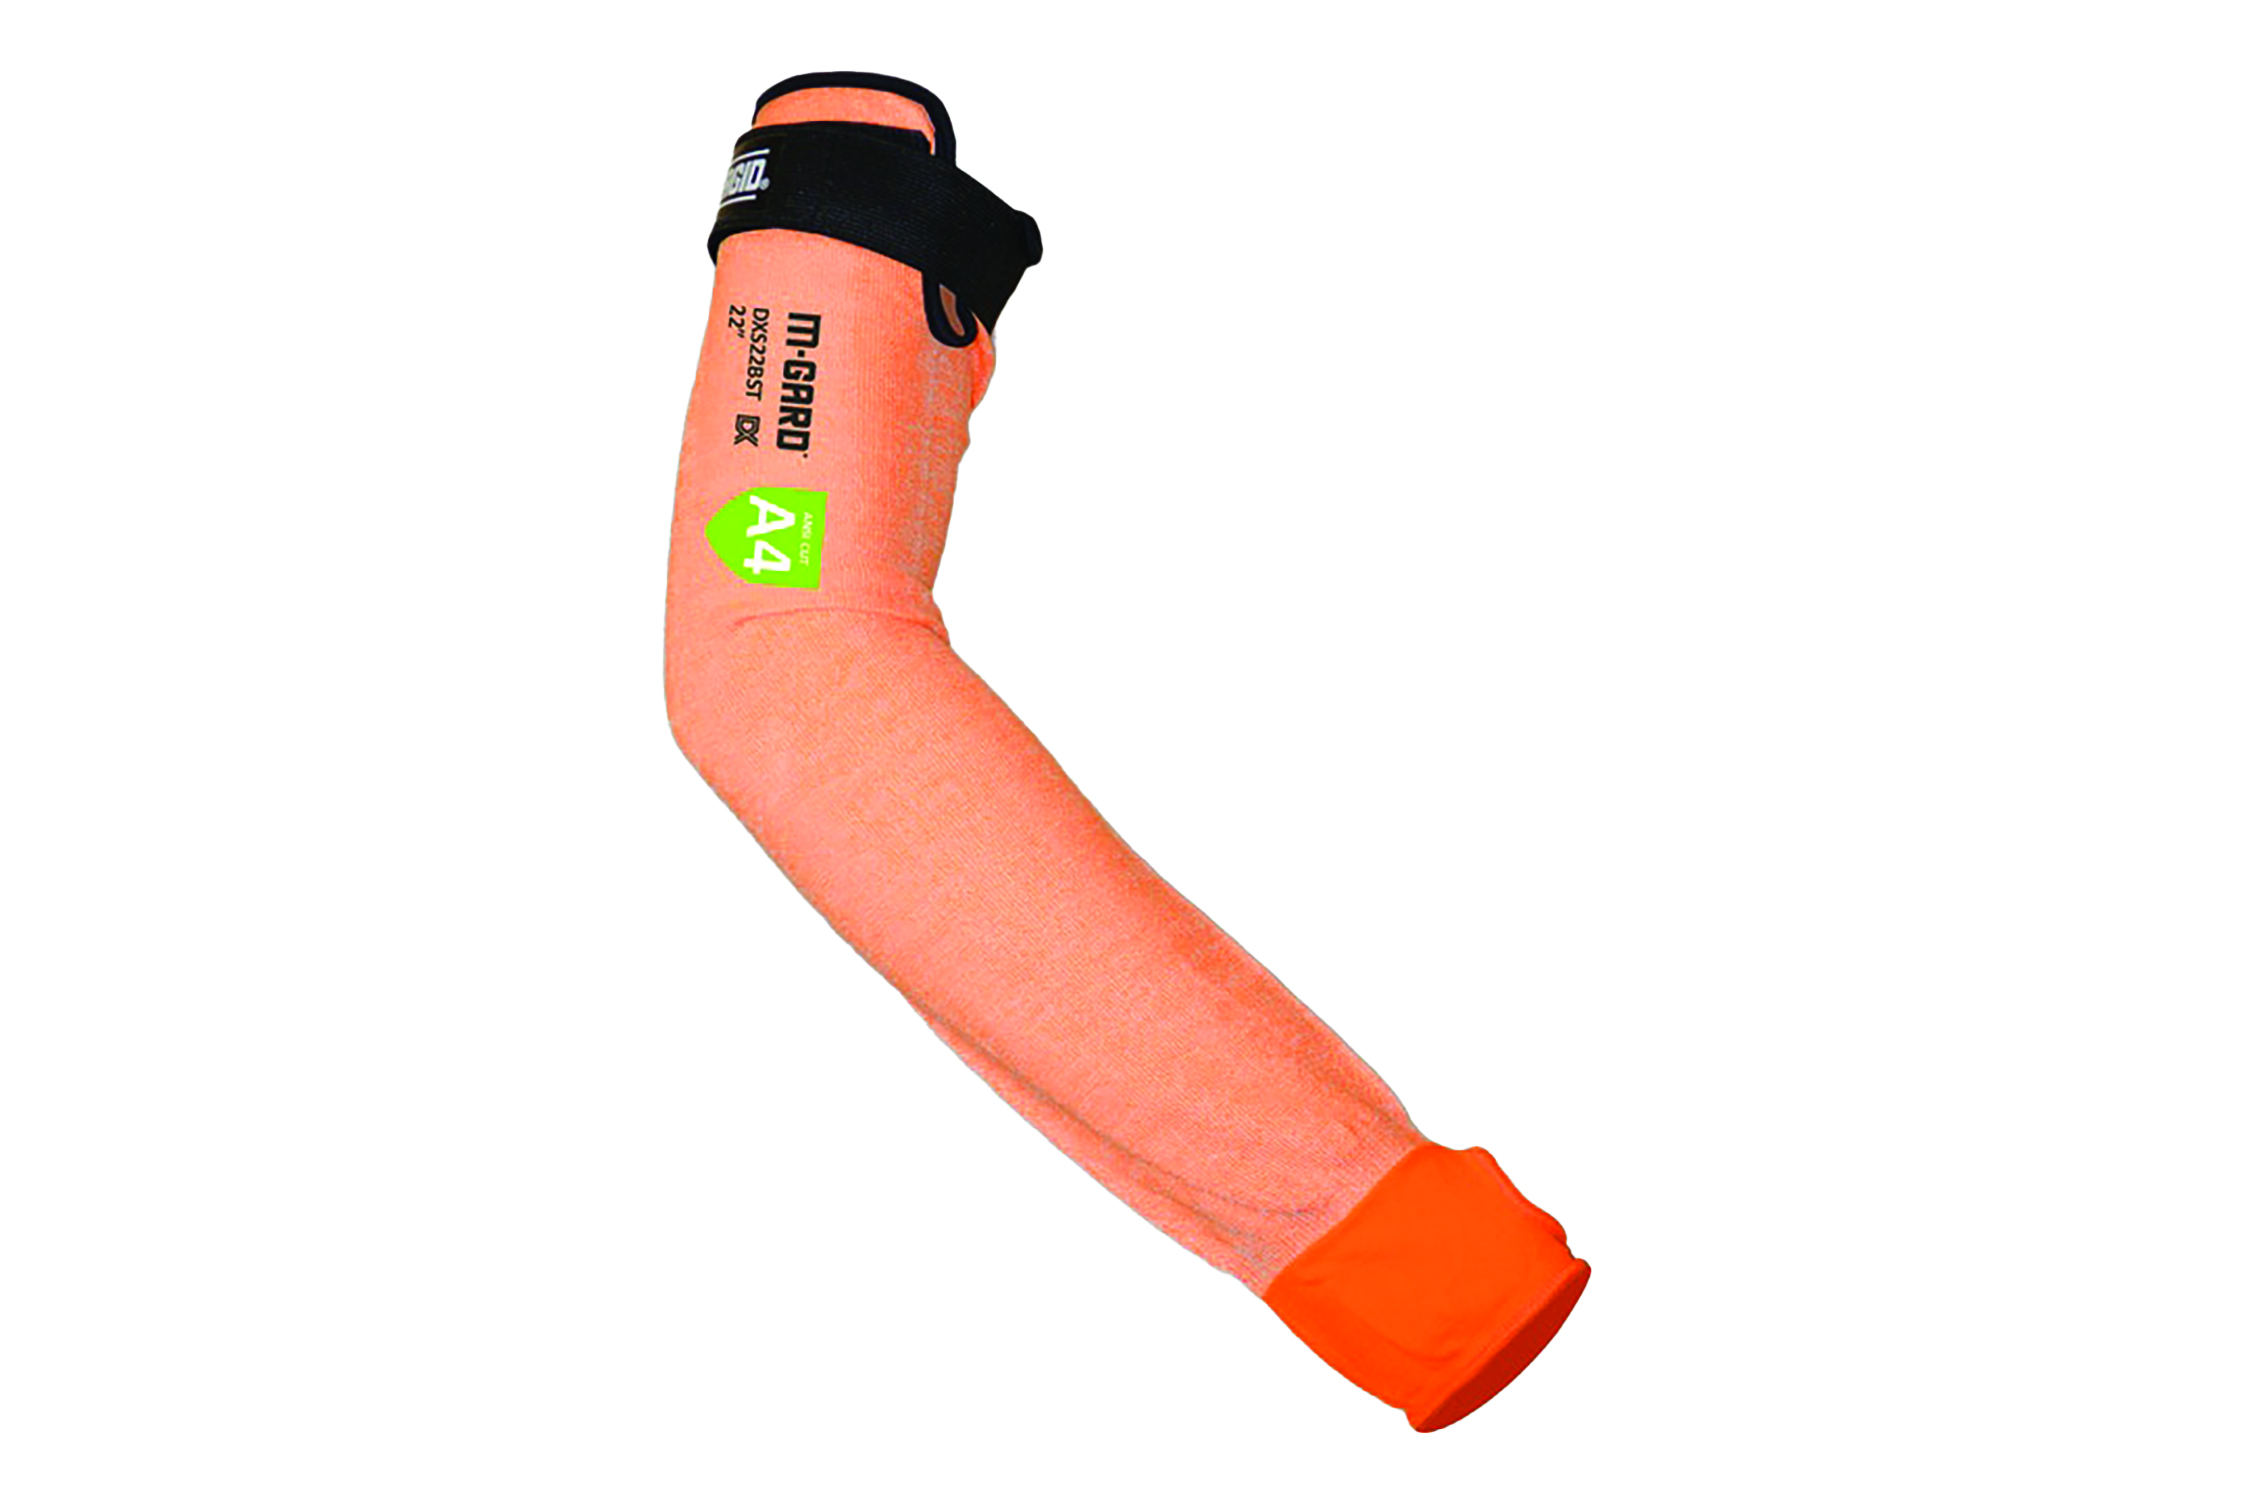 An orange sleeve with a black band and green "A4" label. Image by Magid.